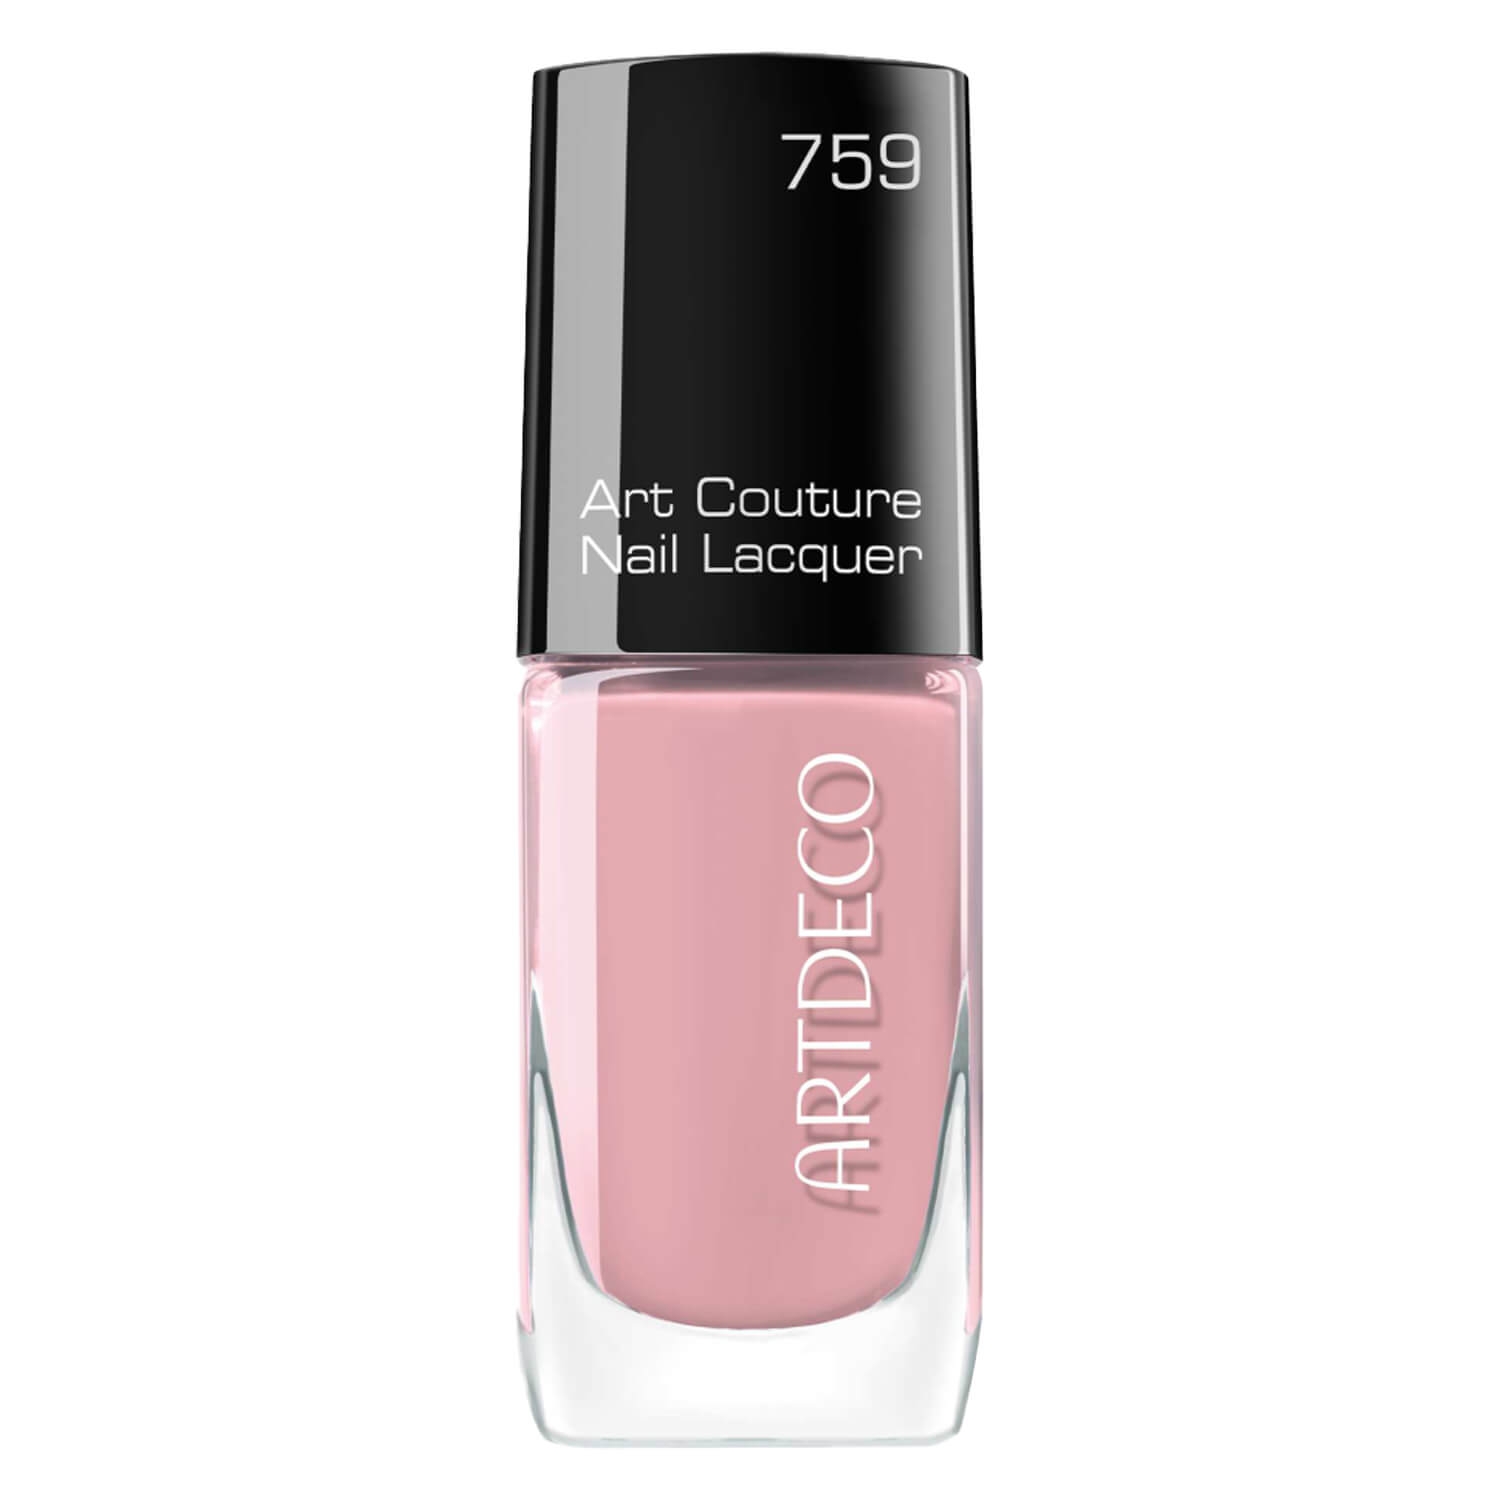 Produktbild von Art Couture - Nail Lacquer Loved by Generations 759